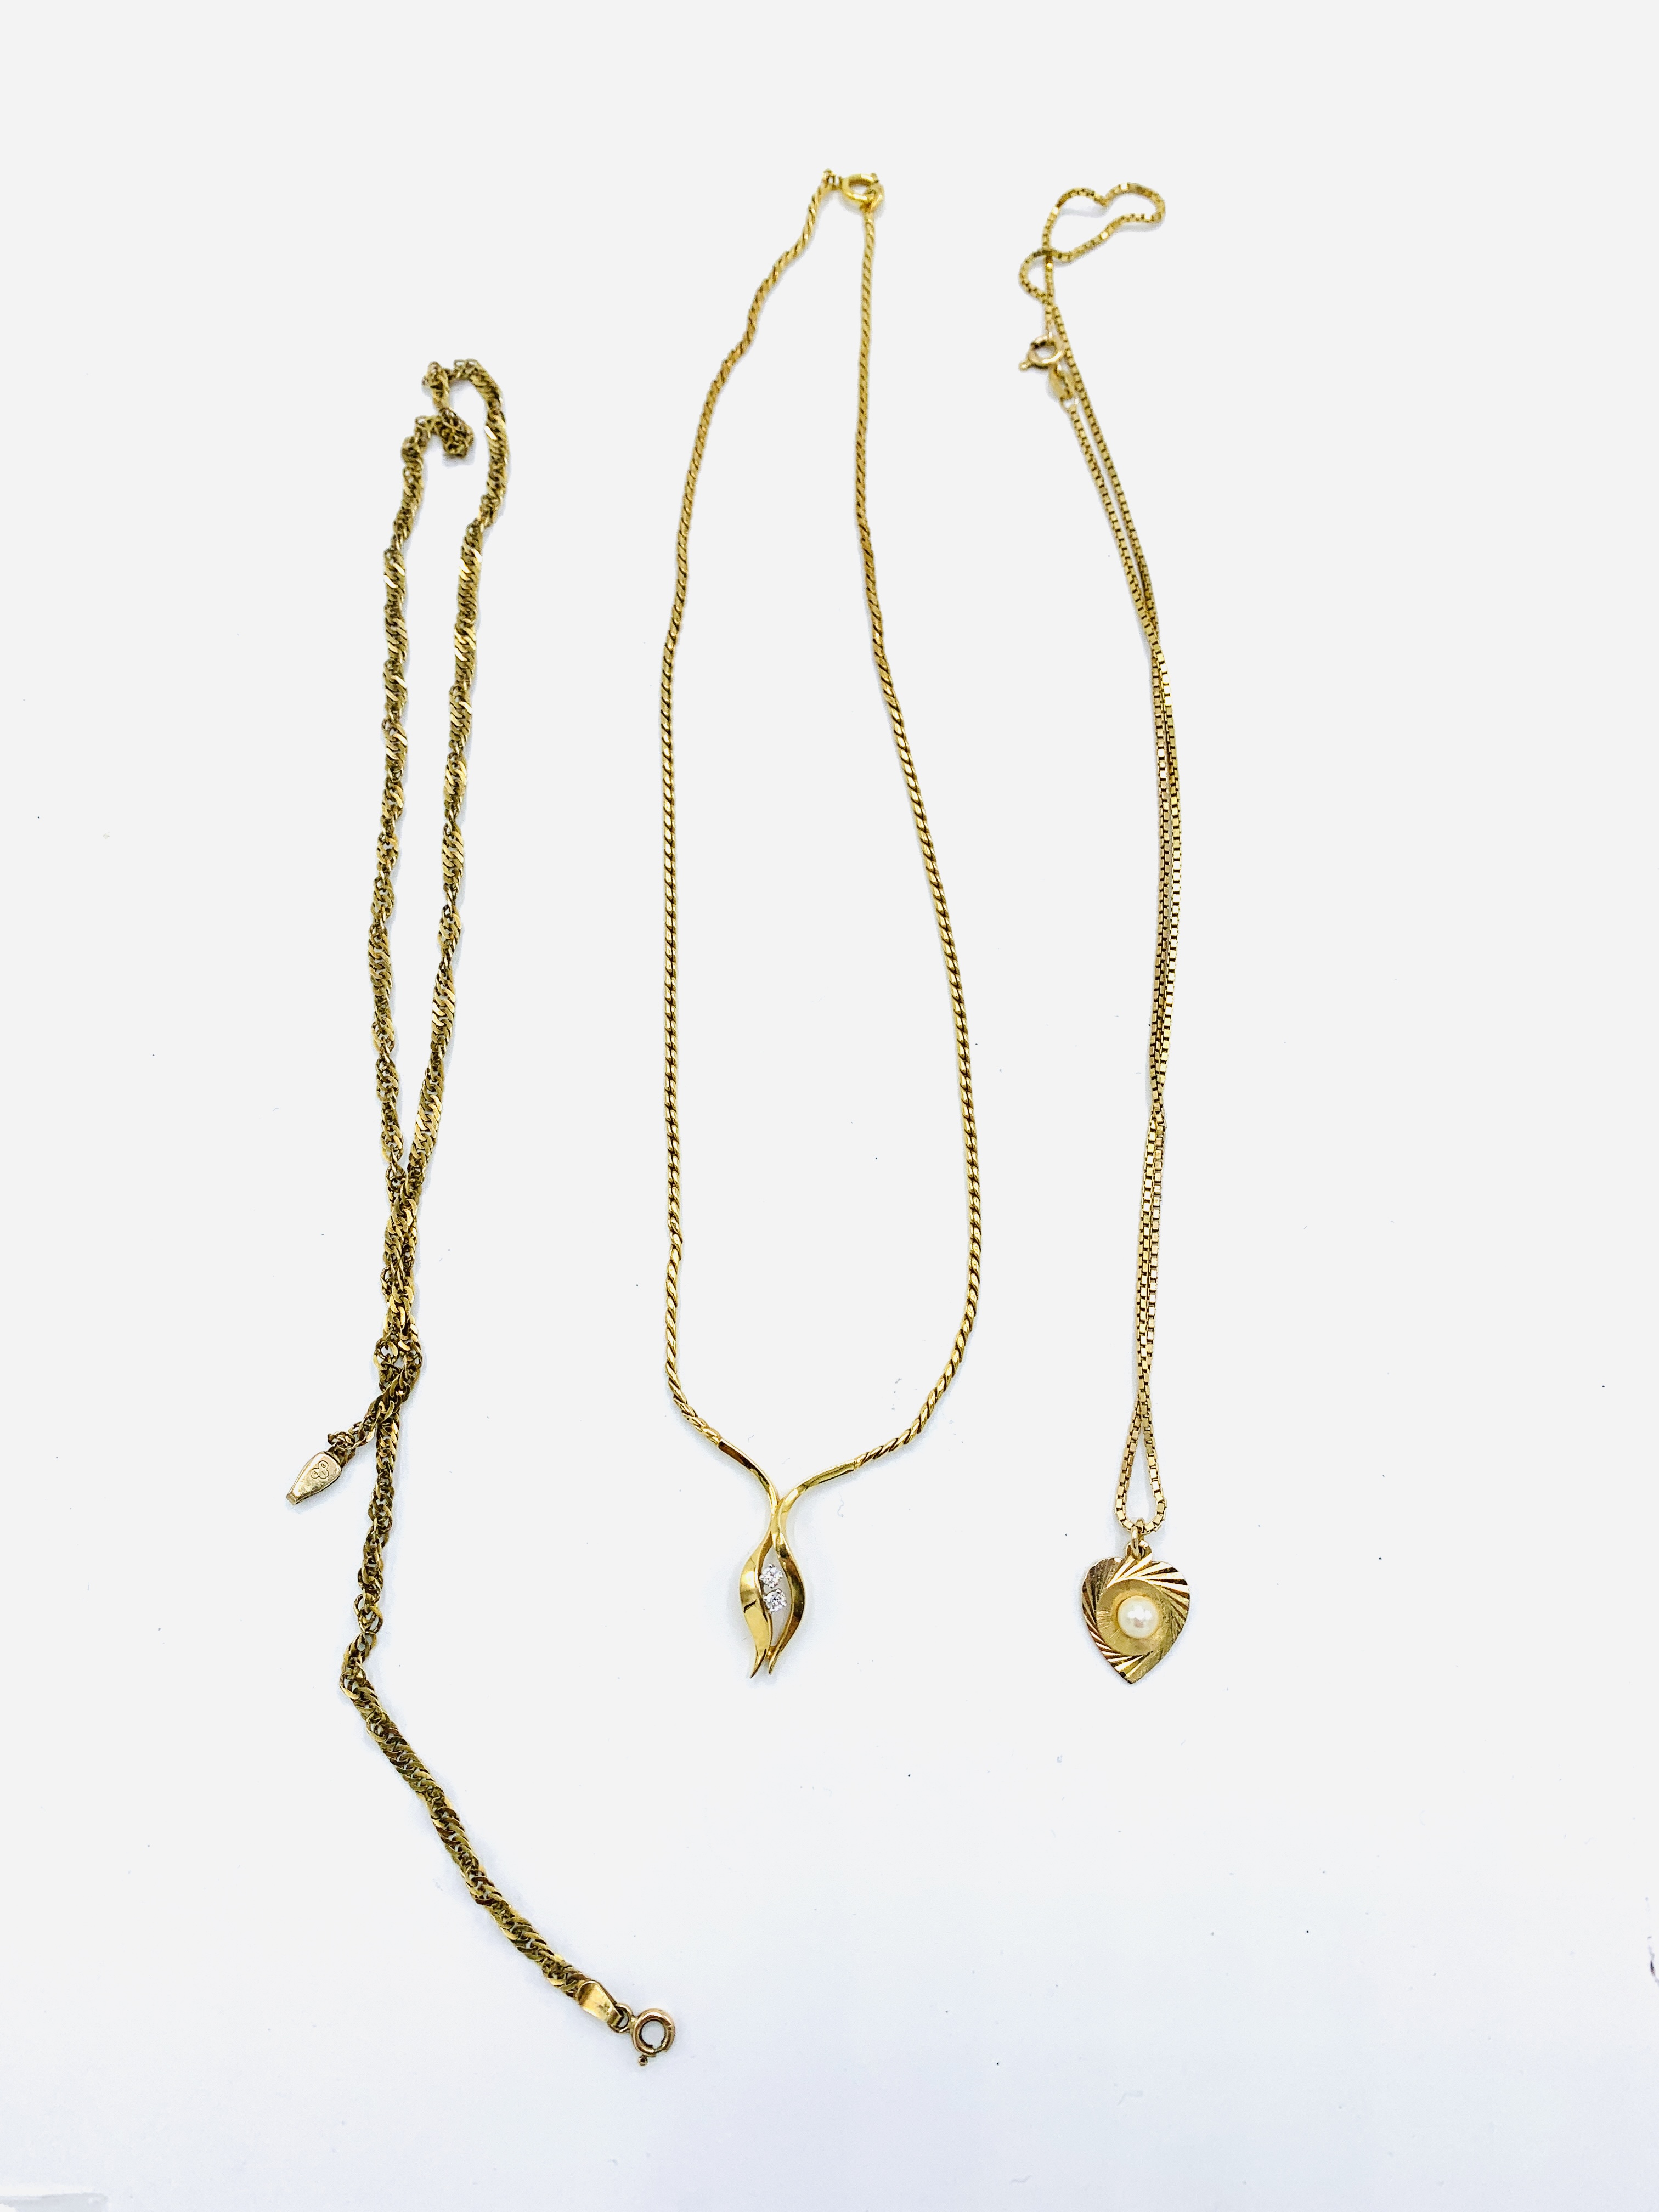 A 9ct gold pendant together with a 9ct gold necklace and a 9ct gold chain